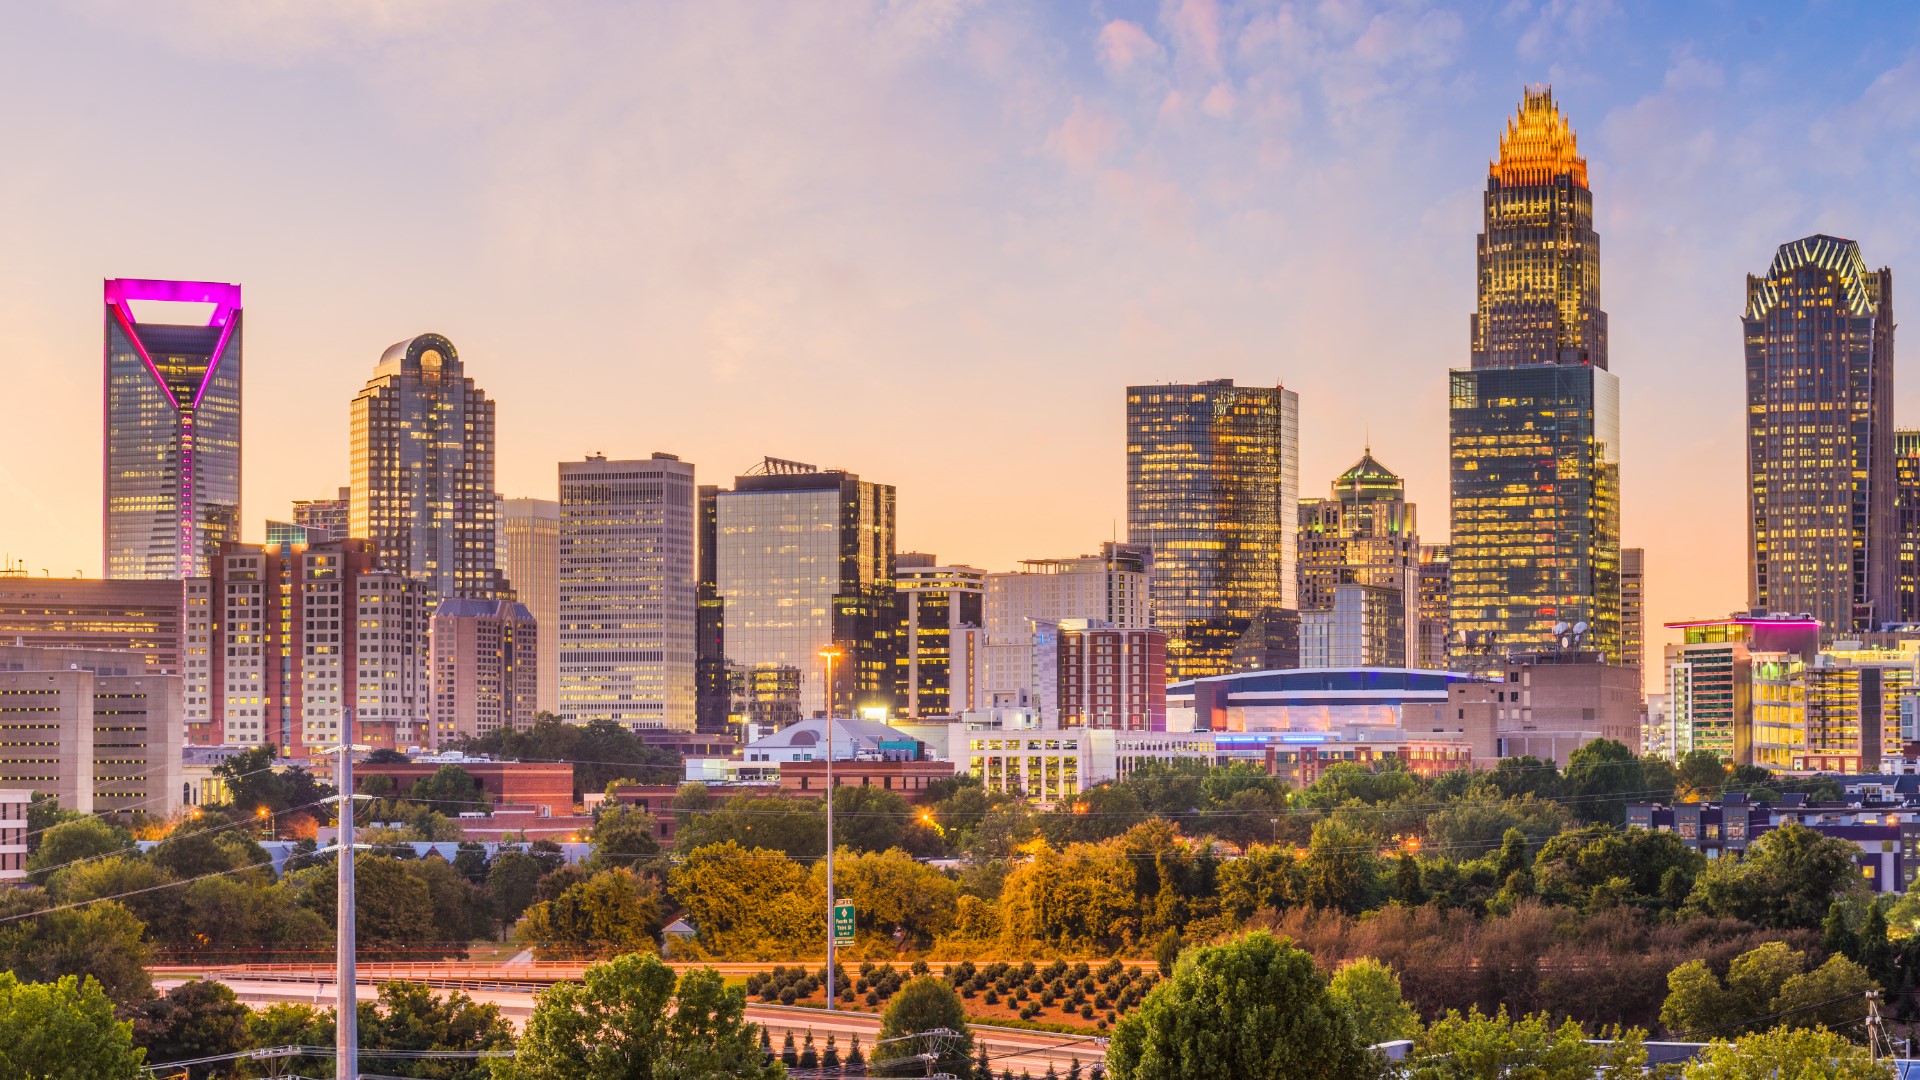 A new study ranks Charlotte as the fifth fastest growing city in the country, according to the Mecklenburg County Pulse Report.